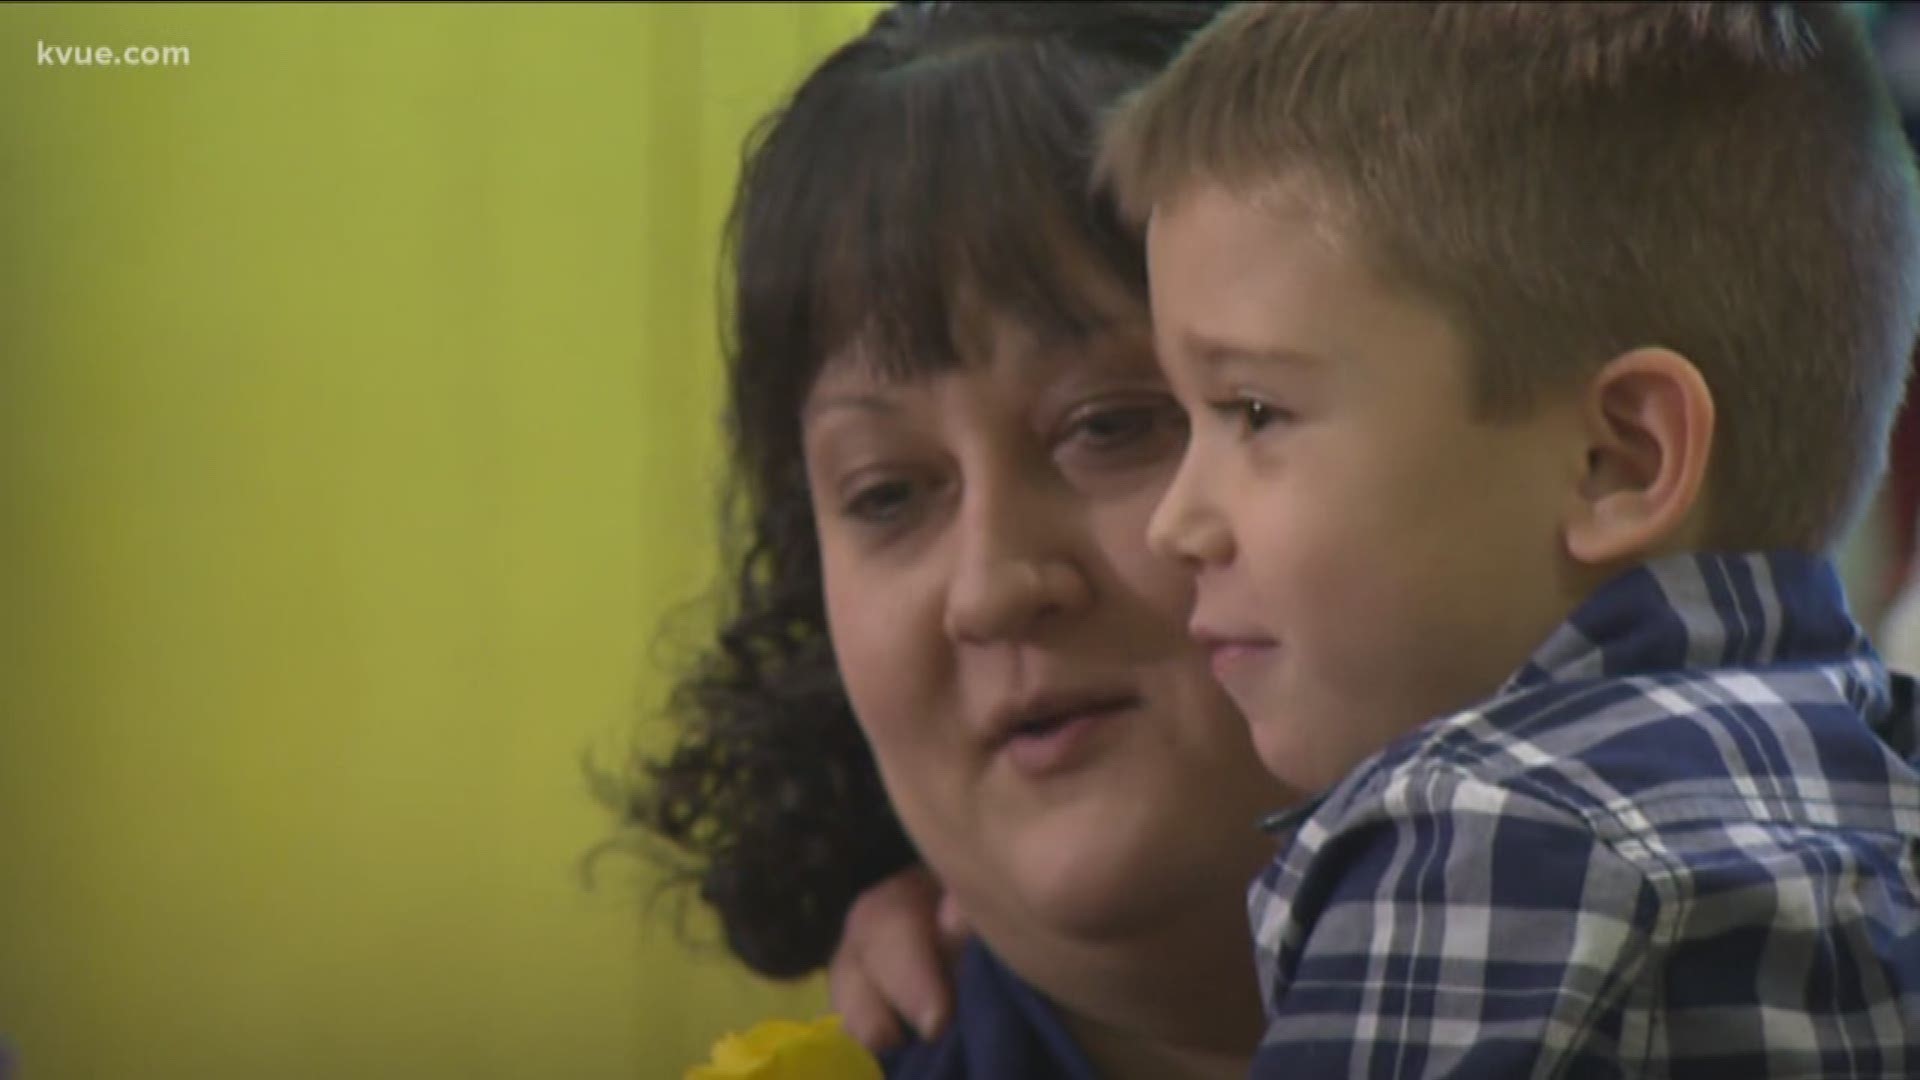 A little Austin boy named Jesse has found his "forever home" after being adopted by the Morton family.